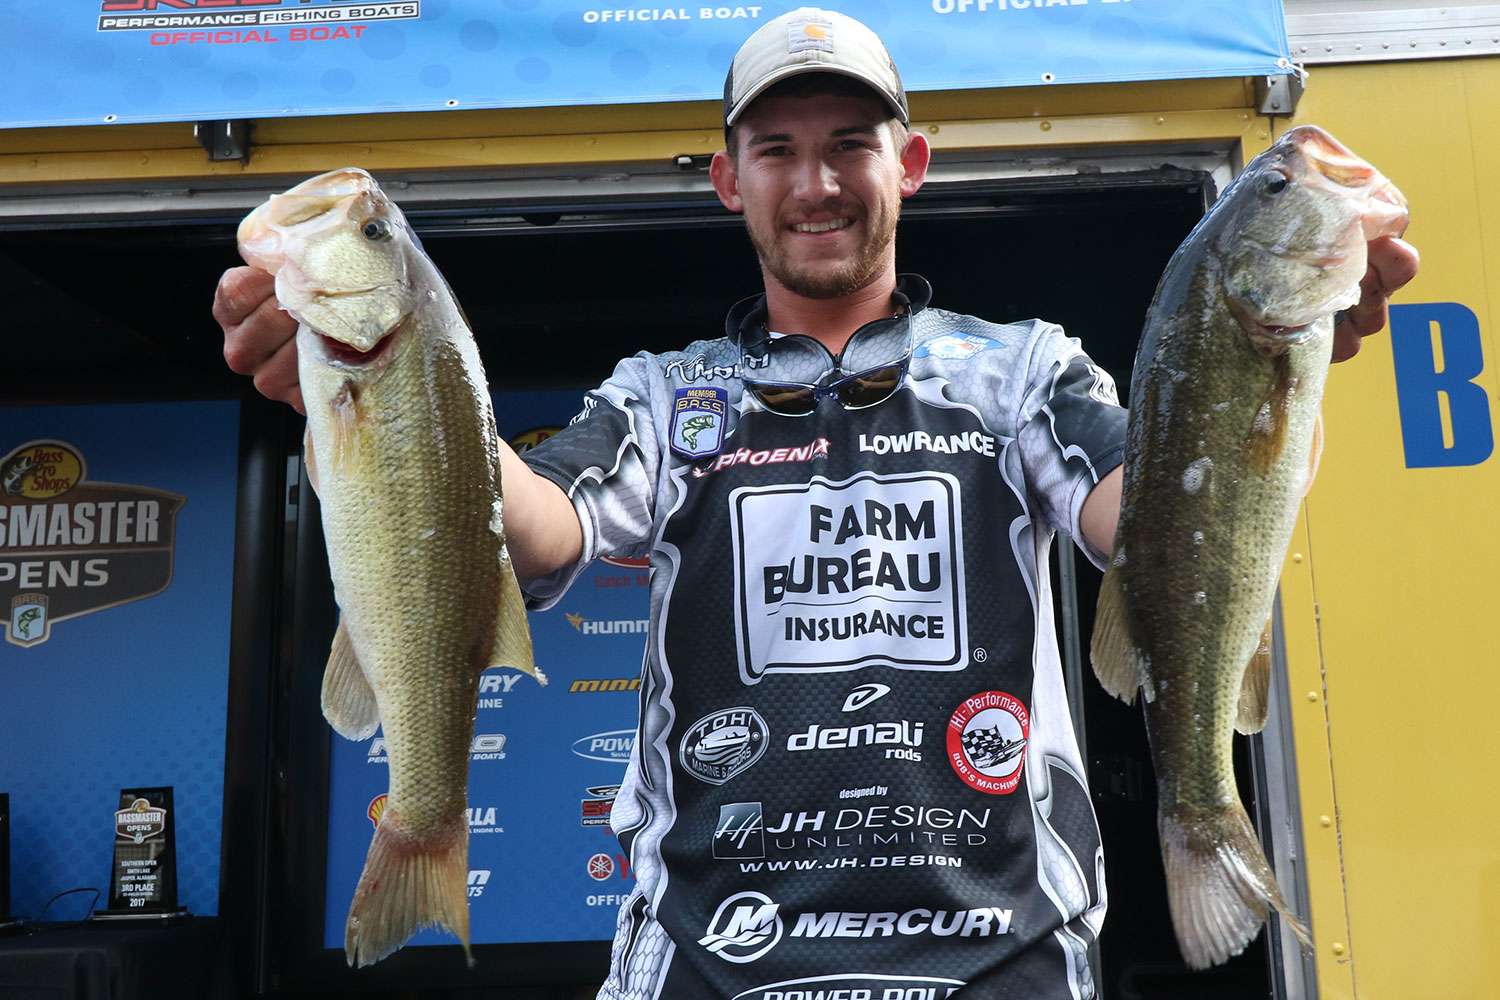 Kyle Monti finished in fifth with 30-7 and earned a 2018 Bassmaster Elite Series bid.